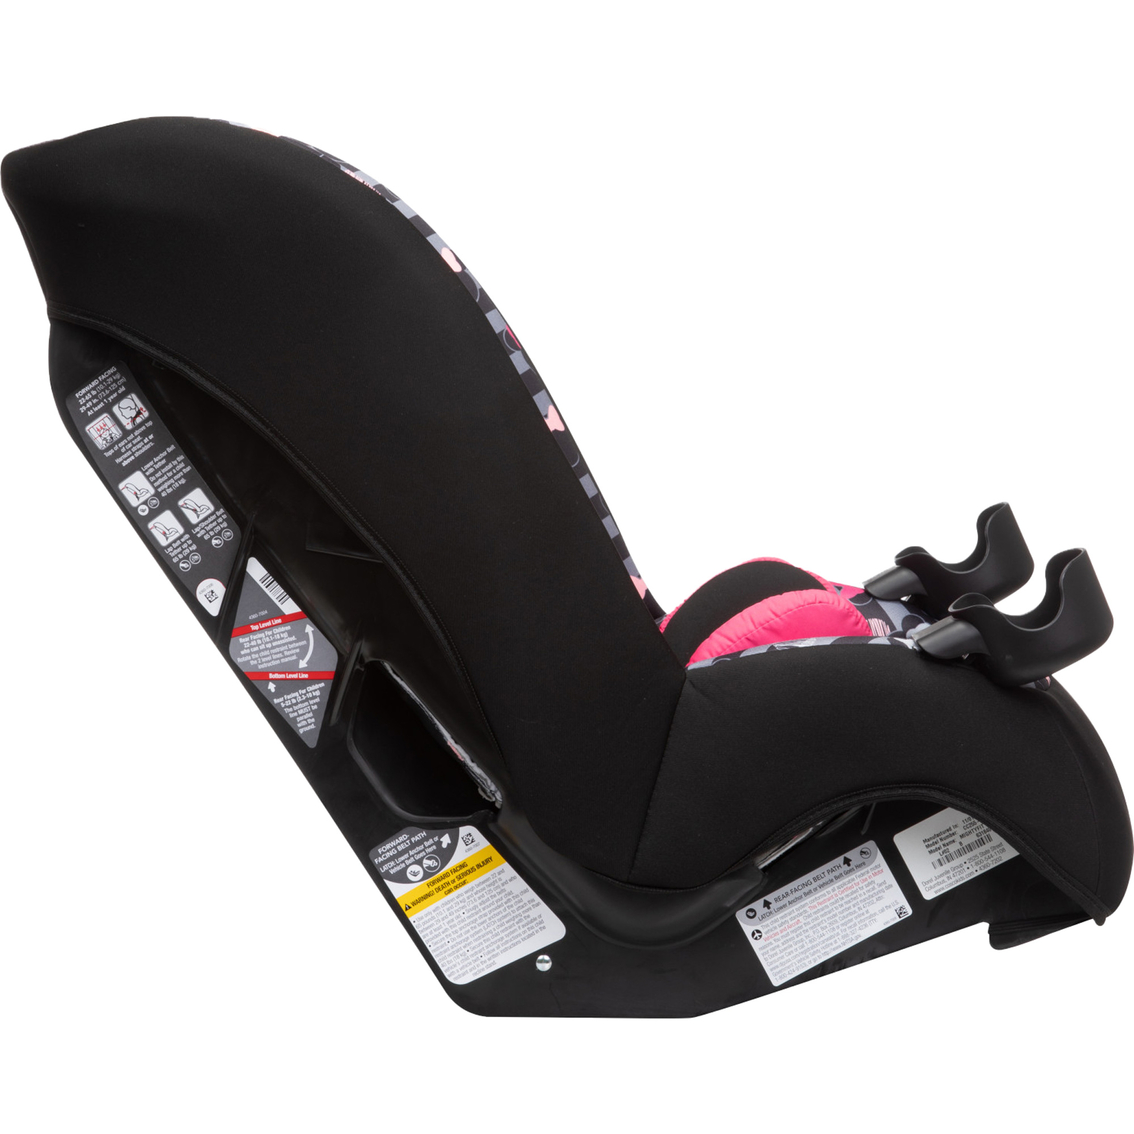 Disney Baby 2 in 1 Convertible Car Seat - Image 9 of 10